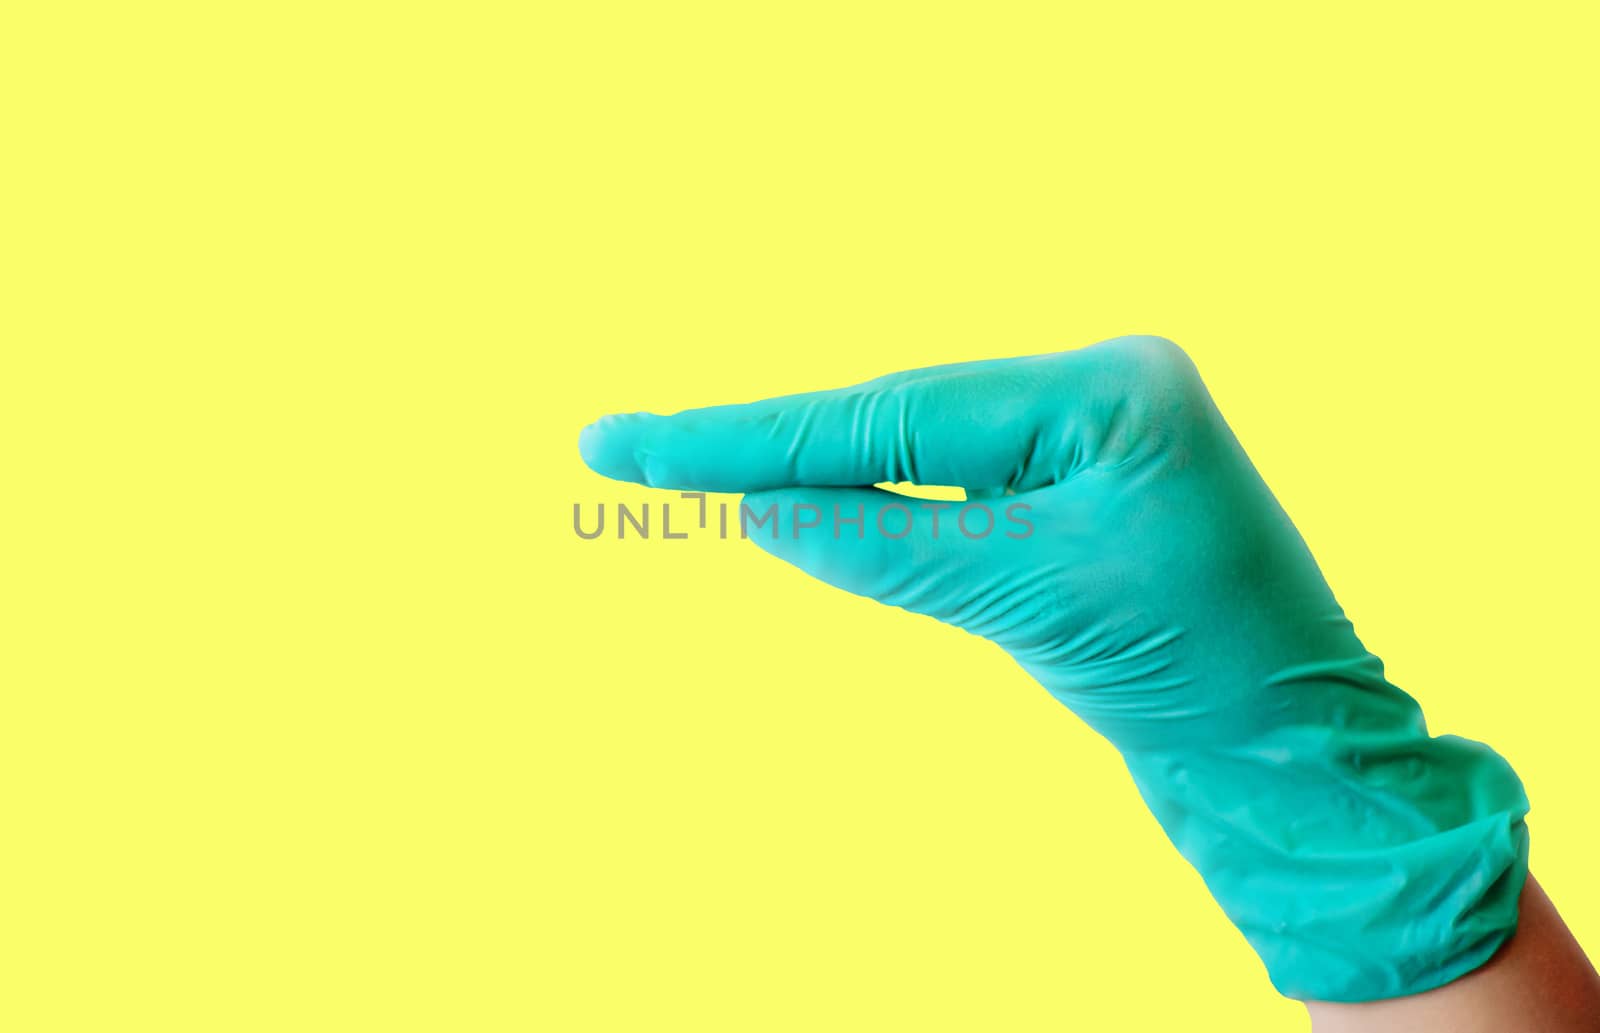 A female hand in a blue latex glove makes a gesture resembling a duck's beak isolate on a light yellow background. Medical health concept. Copy space. by Alla_Morozova93